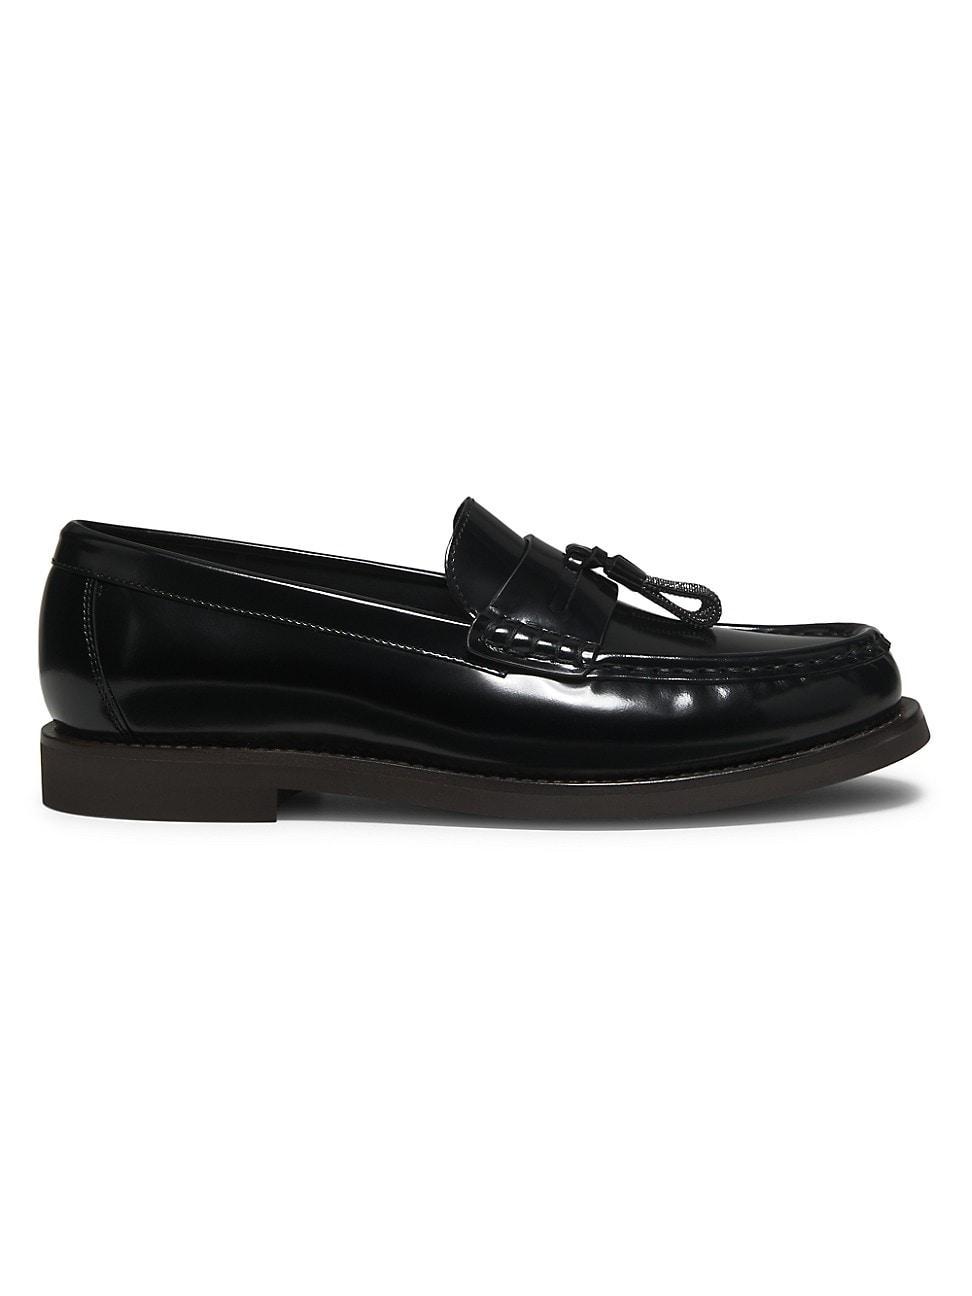 Womens Leather Loafers Product Image